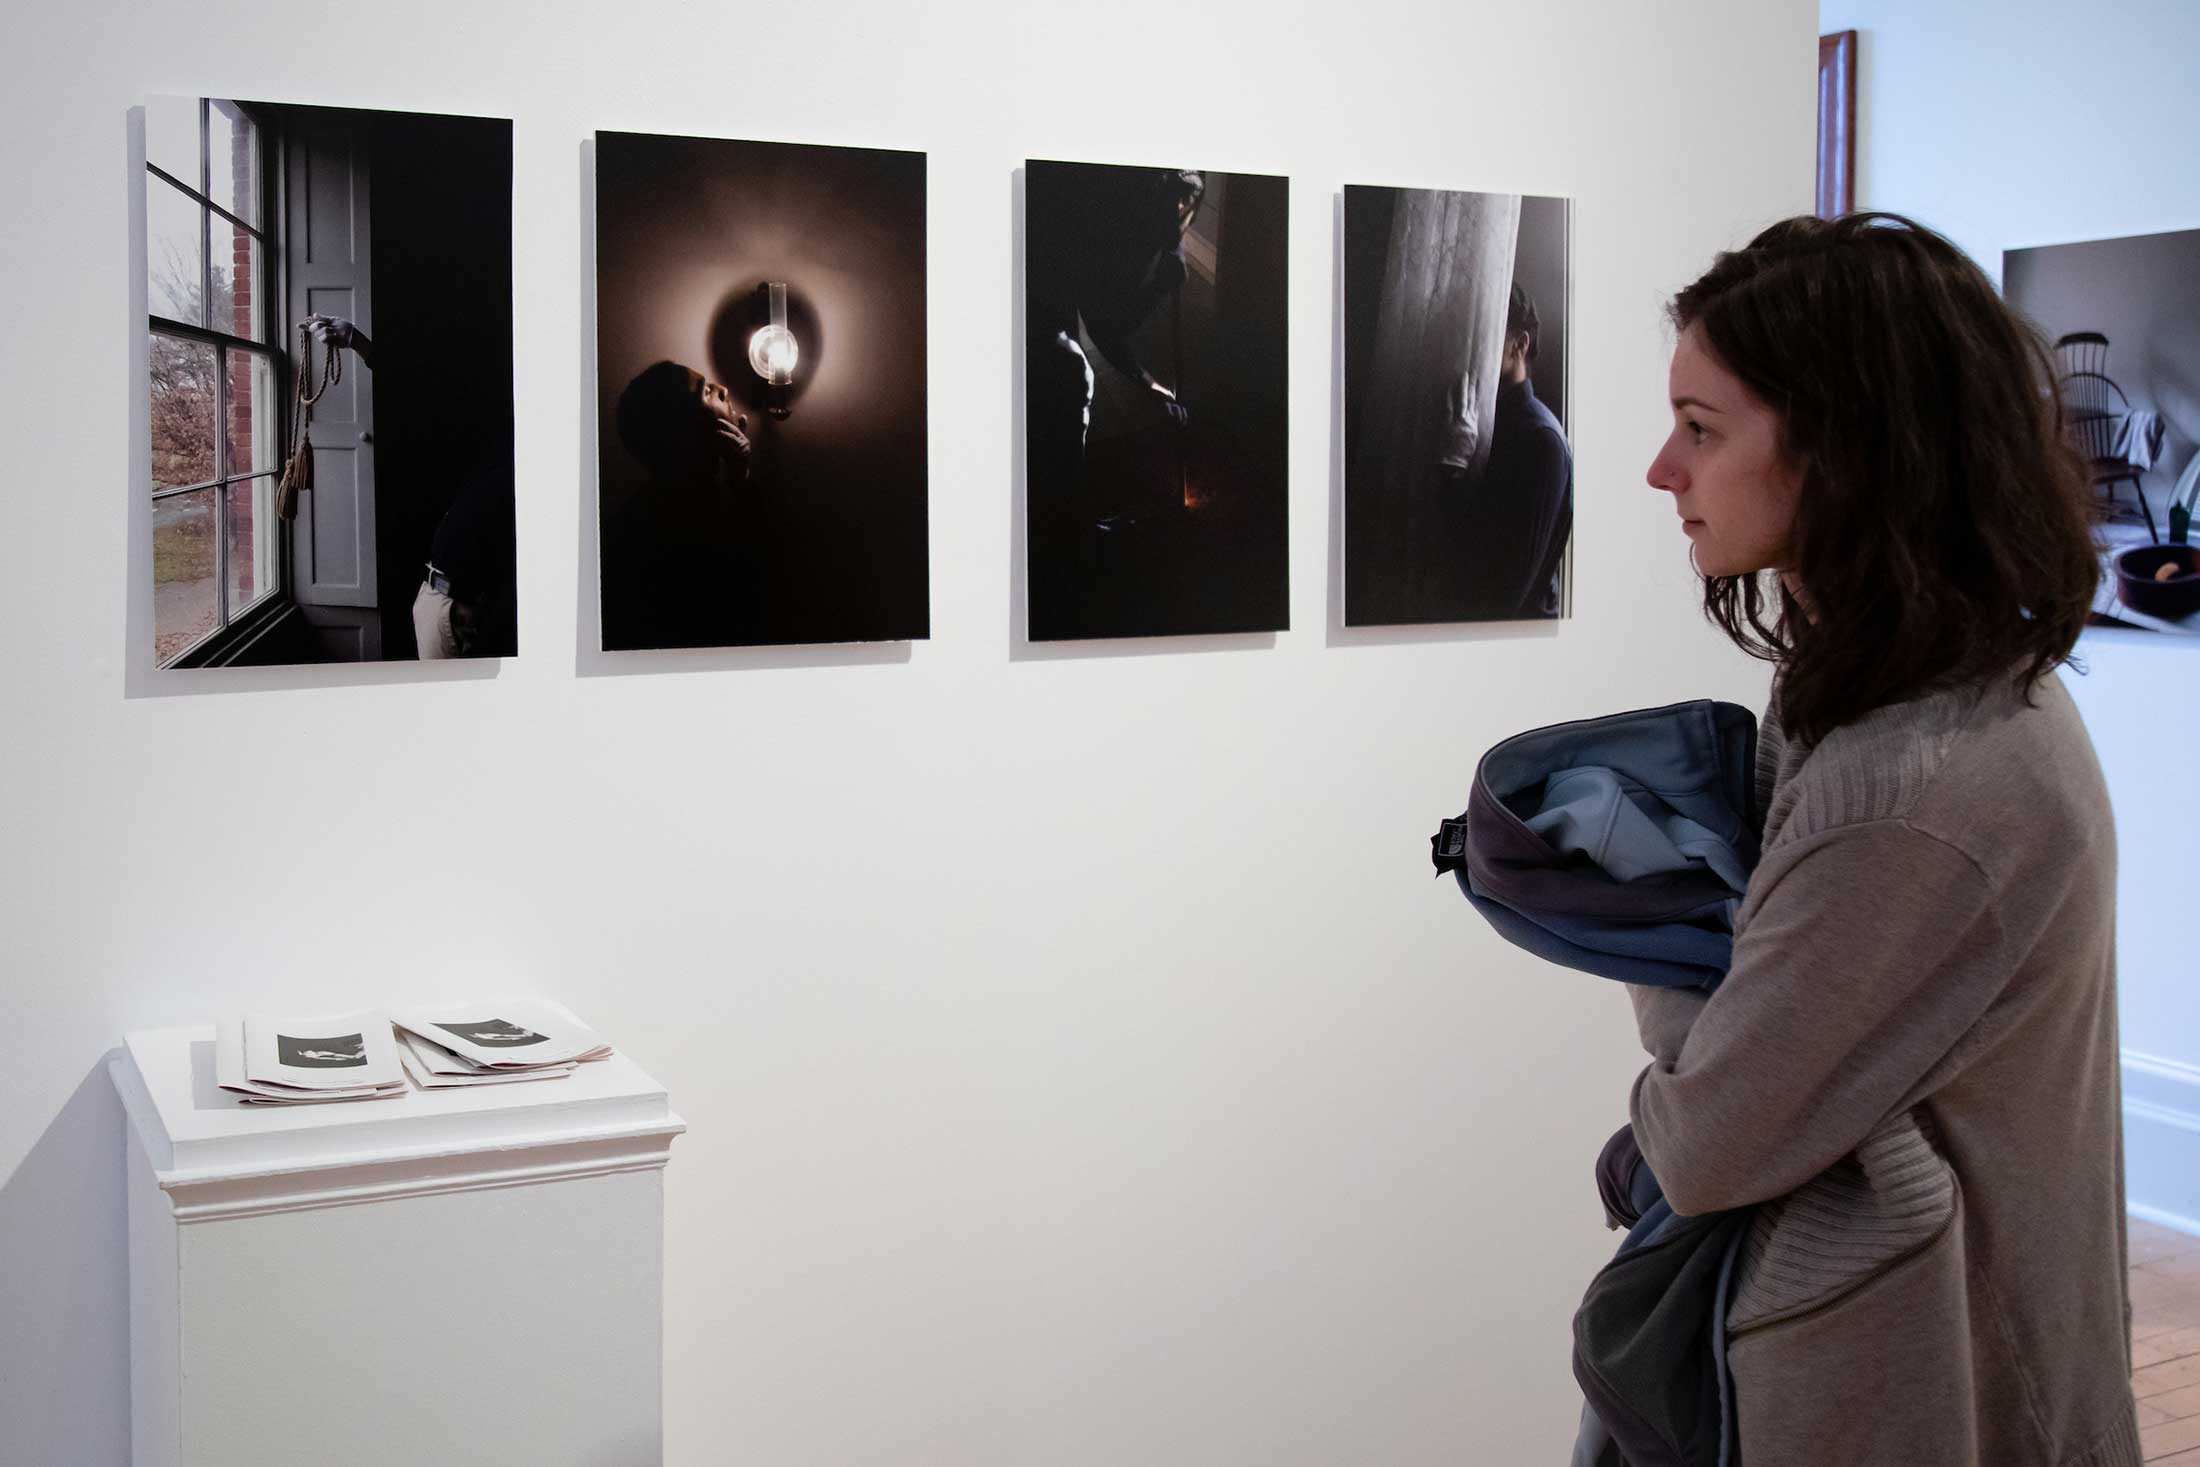 Images by Jonathan Jackson, left to right: “Compass,” “Pondering,” “Speaking Light,” “Calling, Listening.”